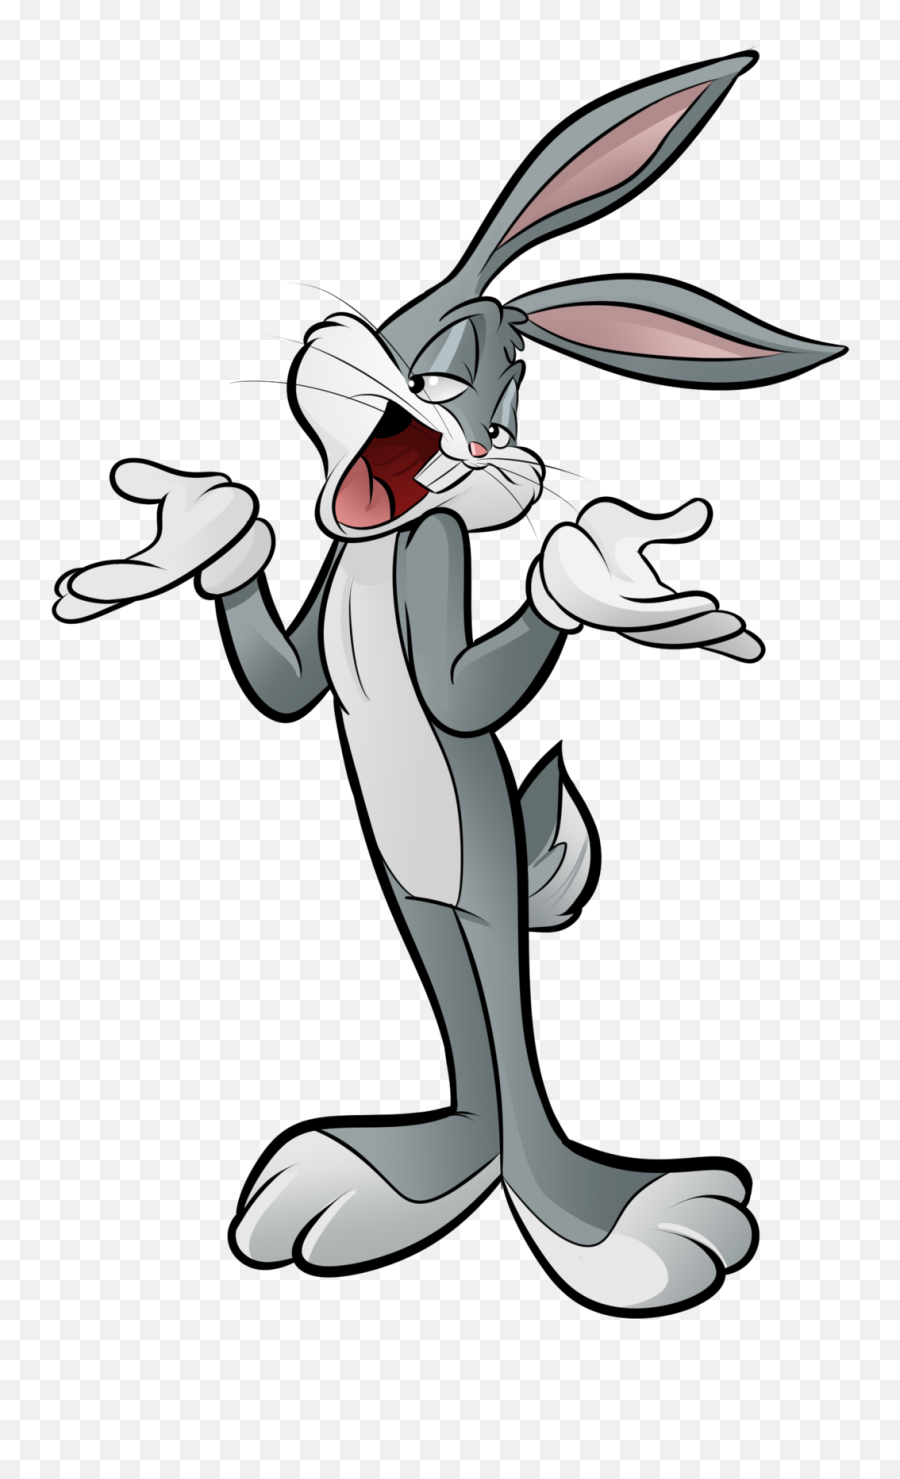 Bugs Bunny No Background : Every image can be downloaded in nearly